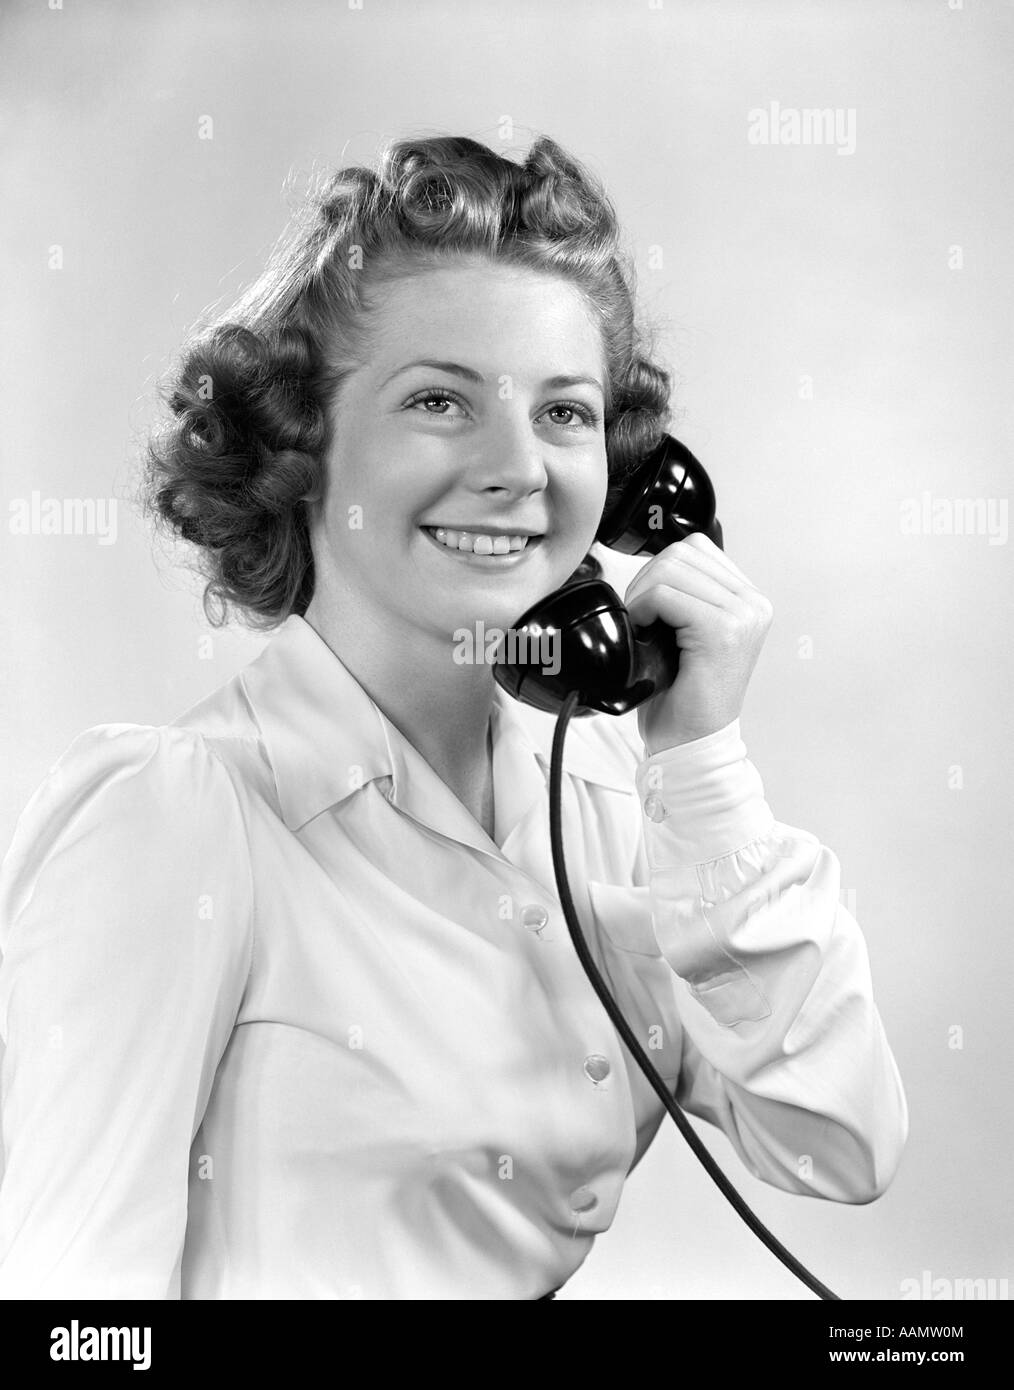 1940s YOUNG GIRL TALKING ON TELEPHONE SMILING WEARING WHITE BLOUSE Stock Photo